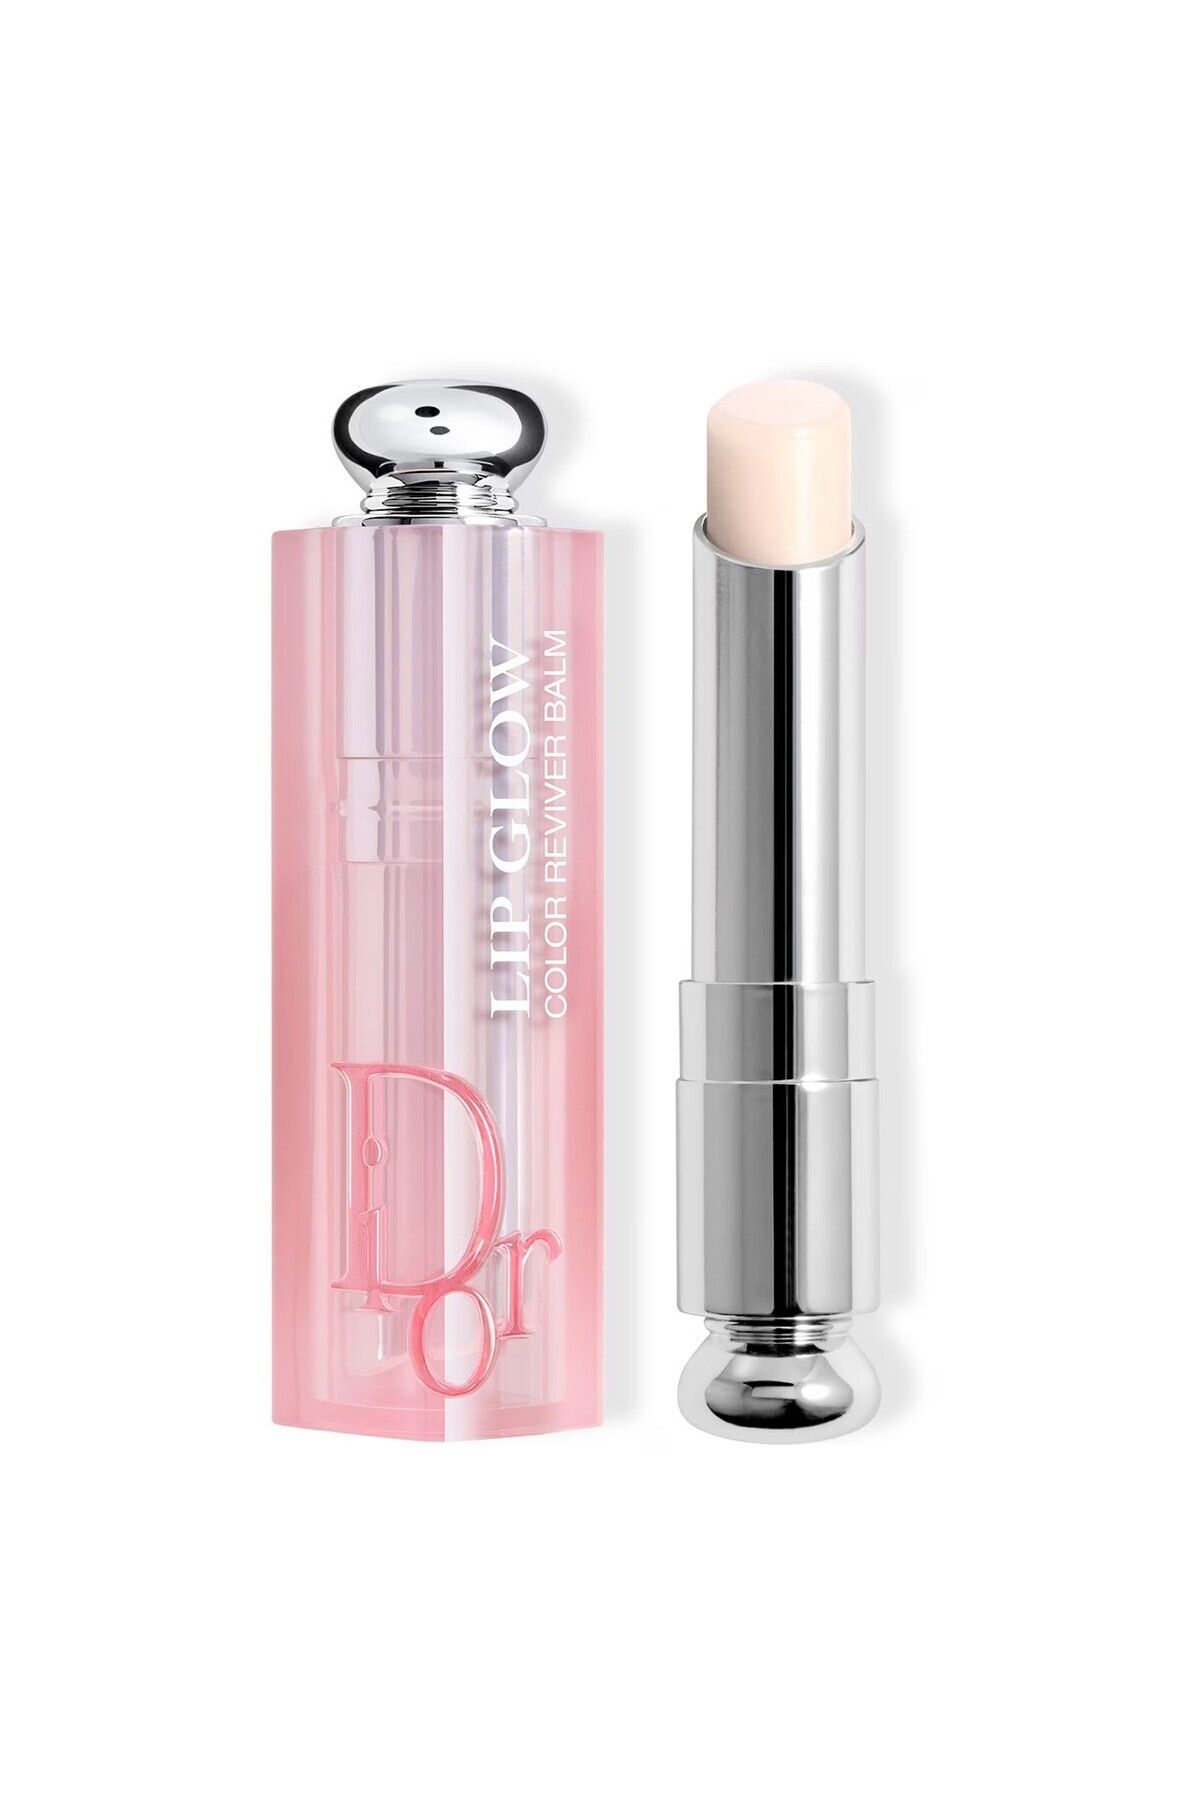 Dior ADDİCT LİP GLOW - 97% NATURAL, 24 HOUR MOİSTURİZİNG AND SMOOTHİNG LİP BALM 3.2 GR DEMBA2314